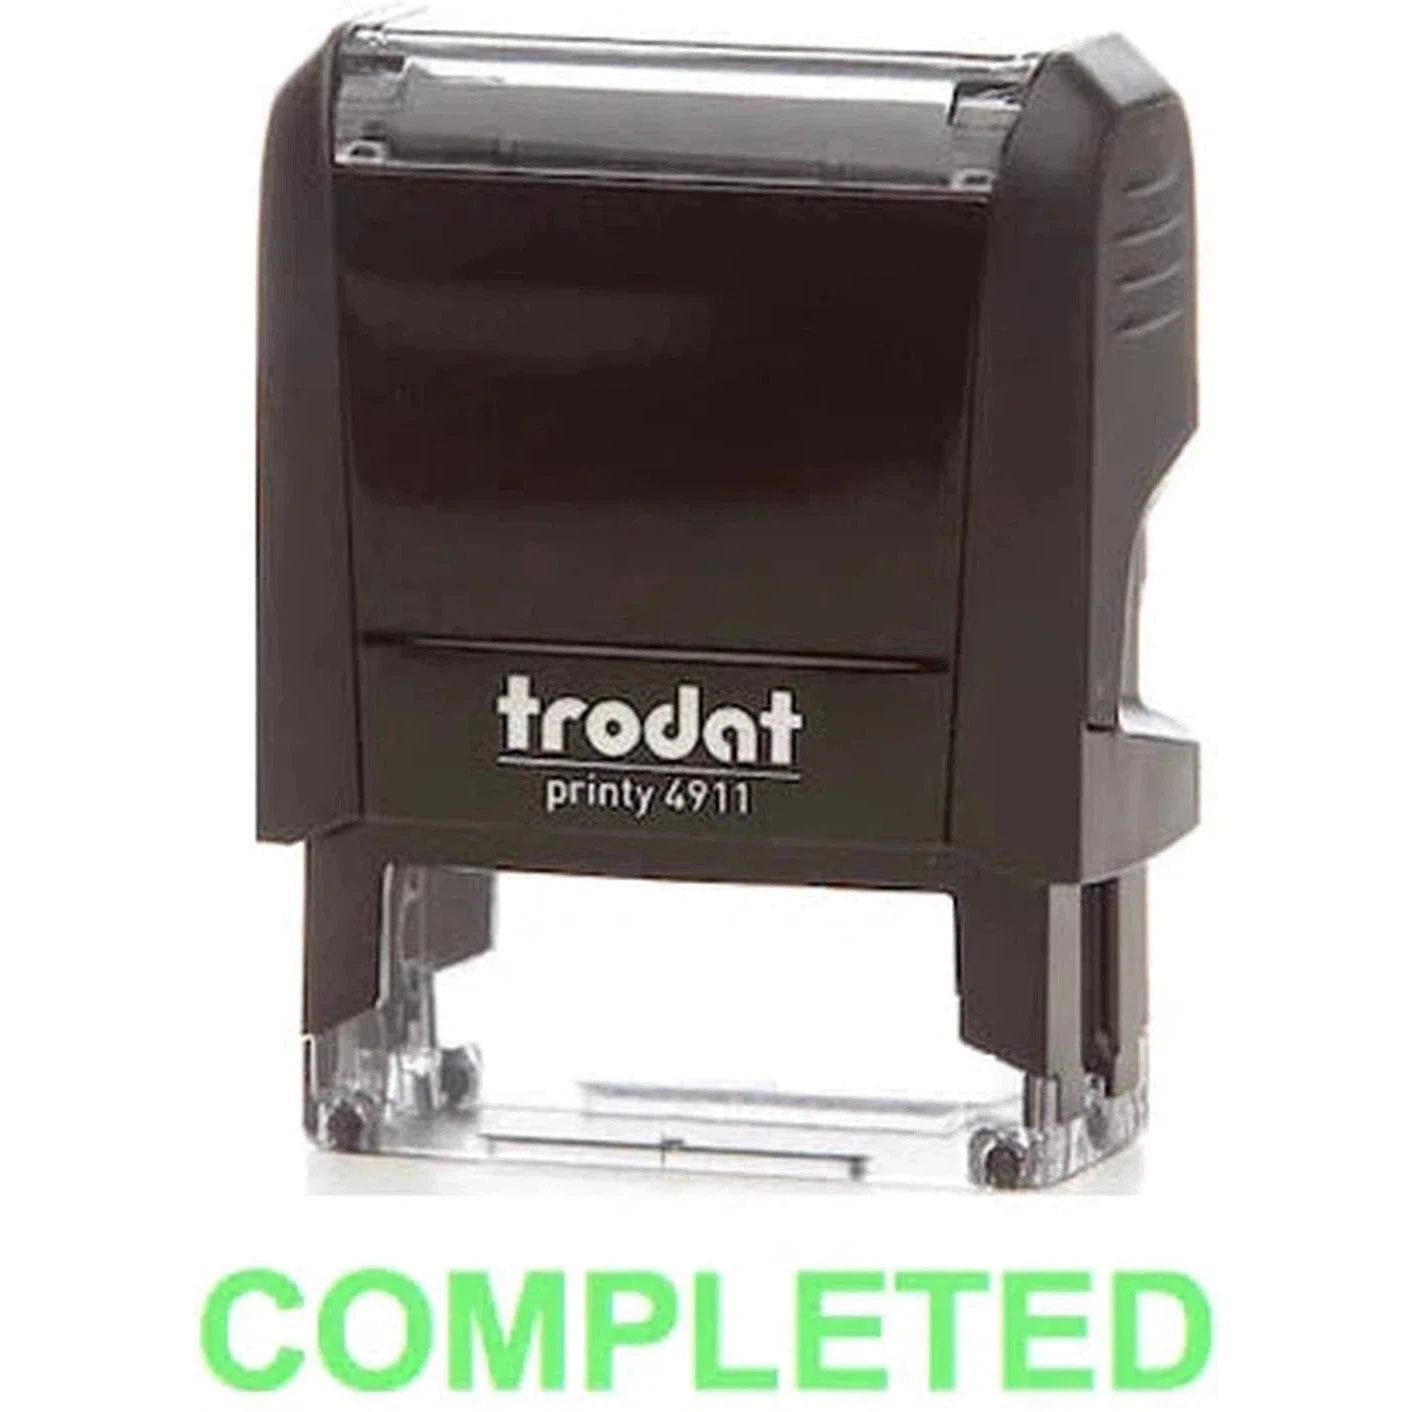 Trodat Printy 4911 Stamp "Completed" - Green-Office Stamp-TRODAT-Star Light Kuwait